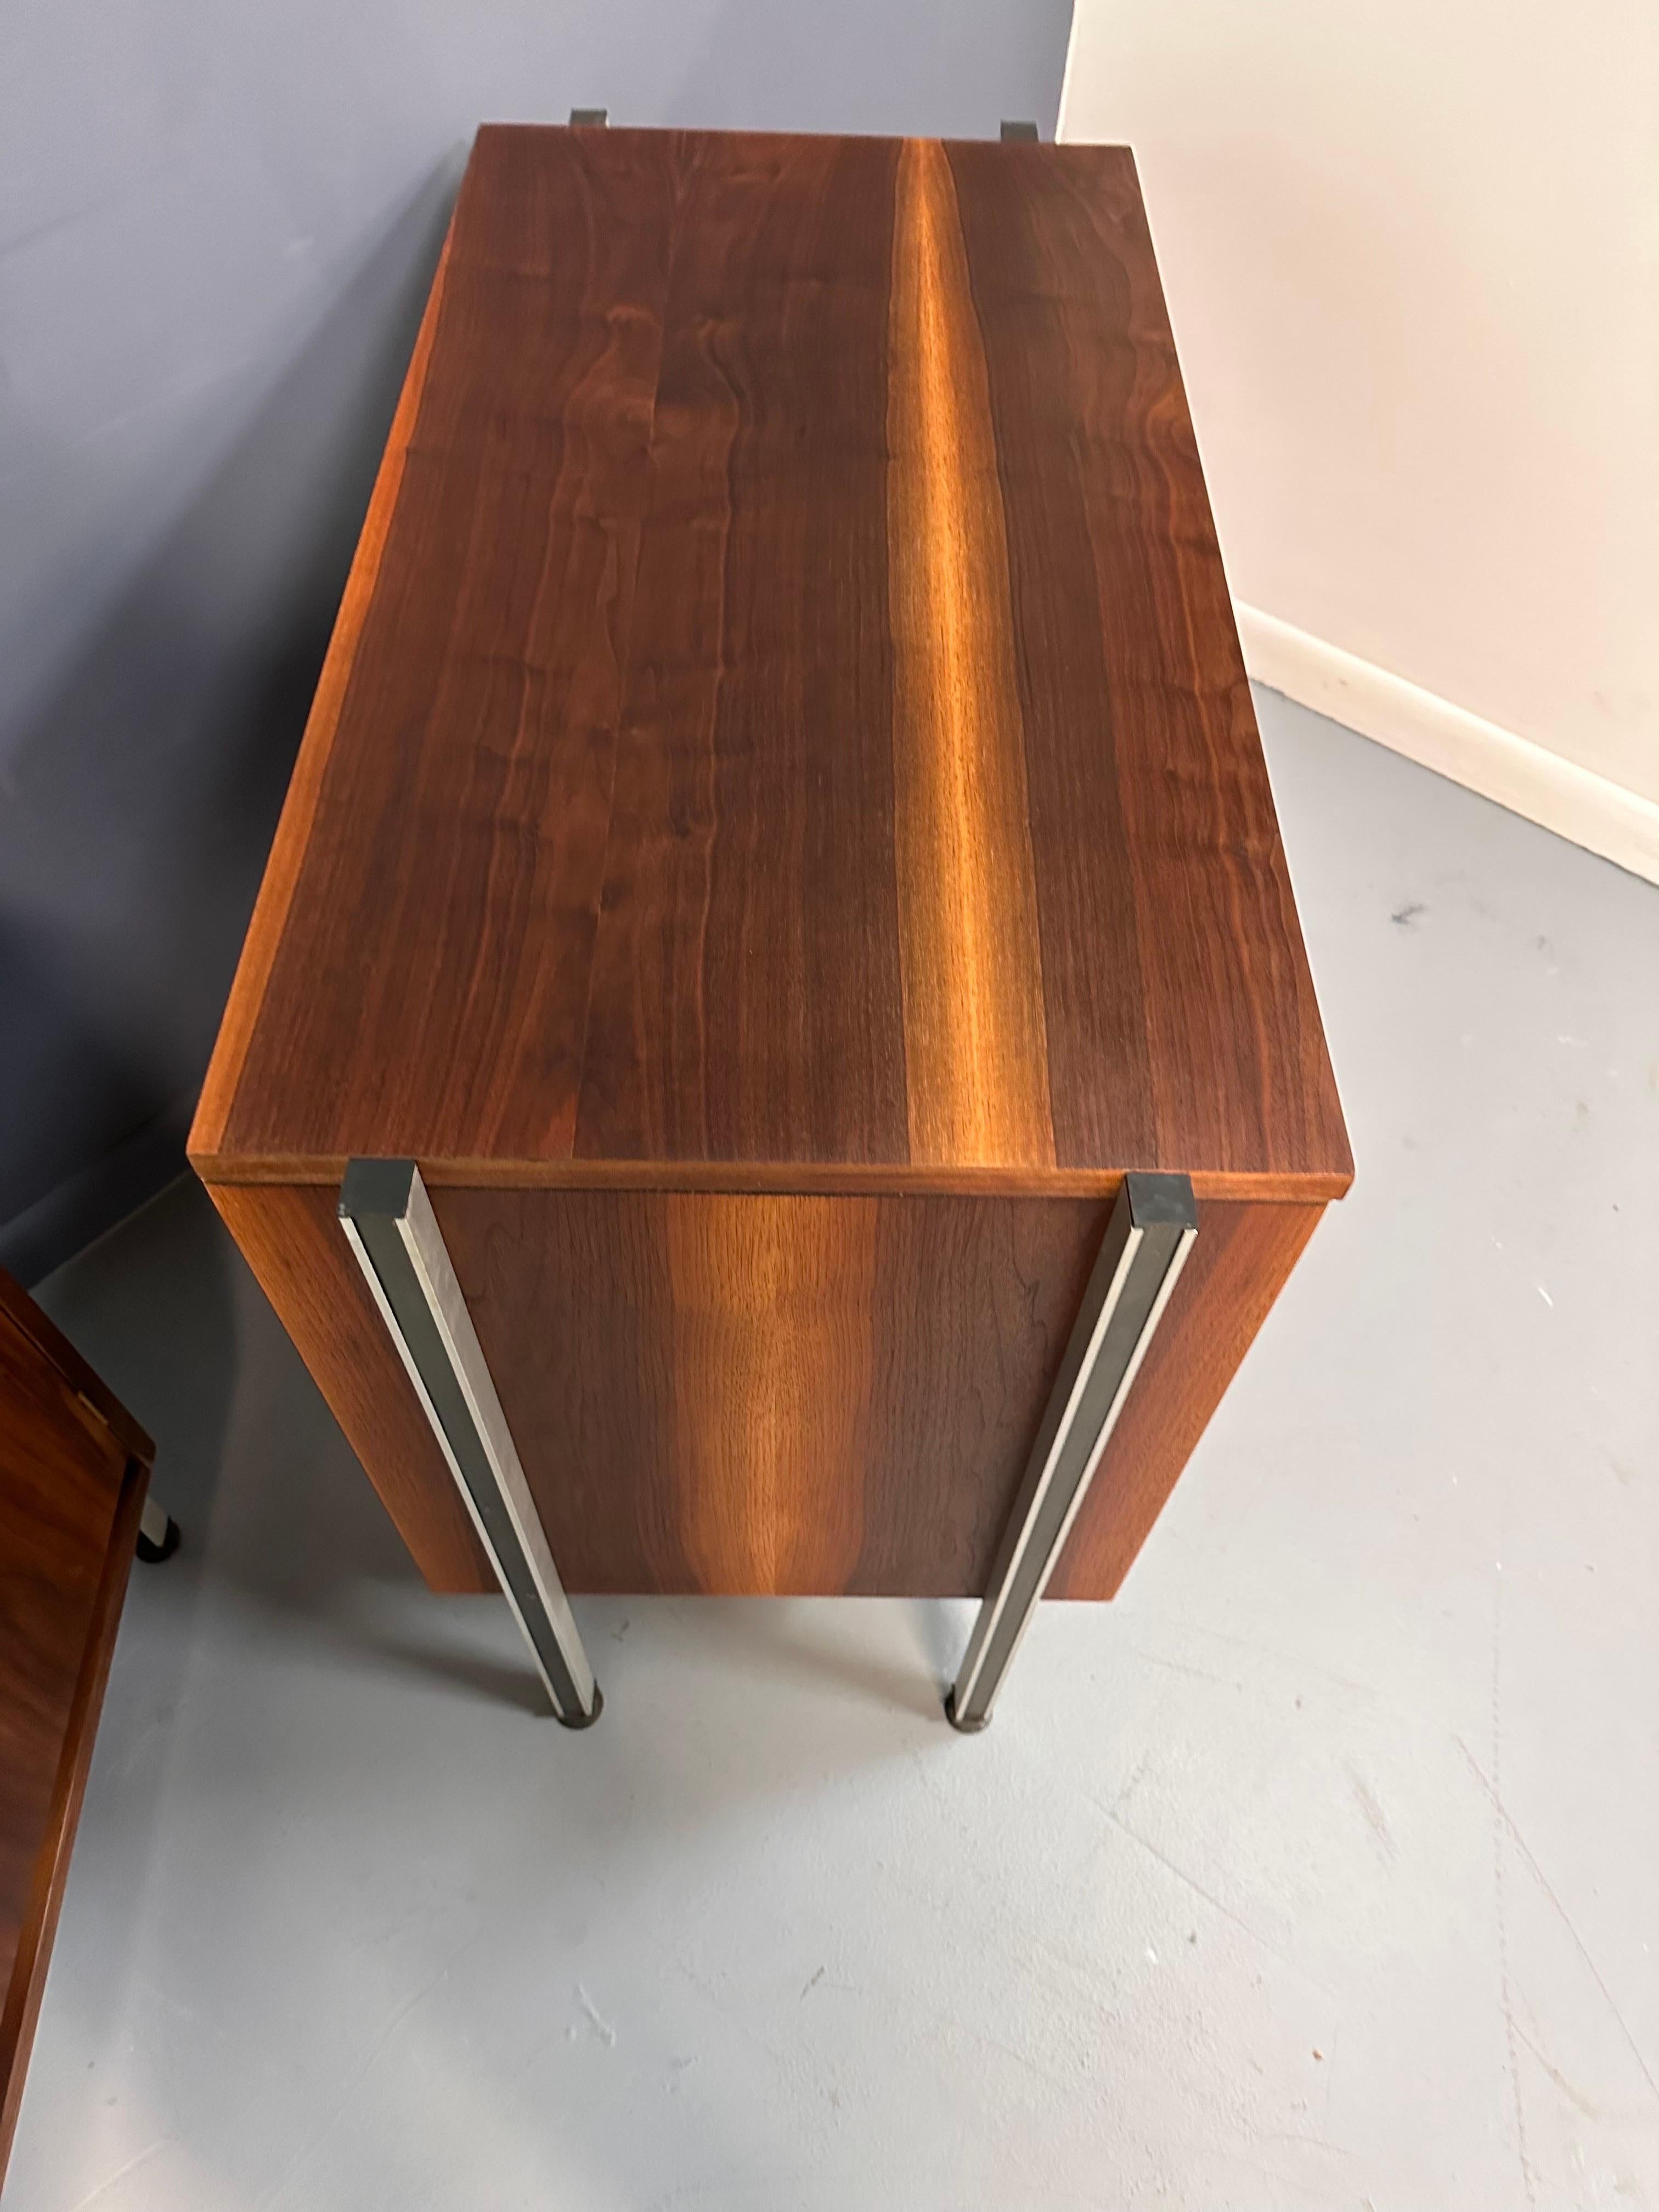 Pair of Midcentury Walnut Cabinets with Exposed Aluminum Legs Style of Wormley 4